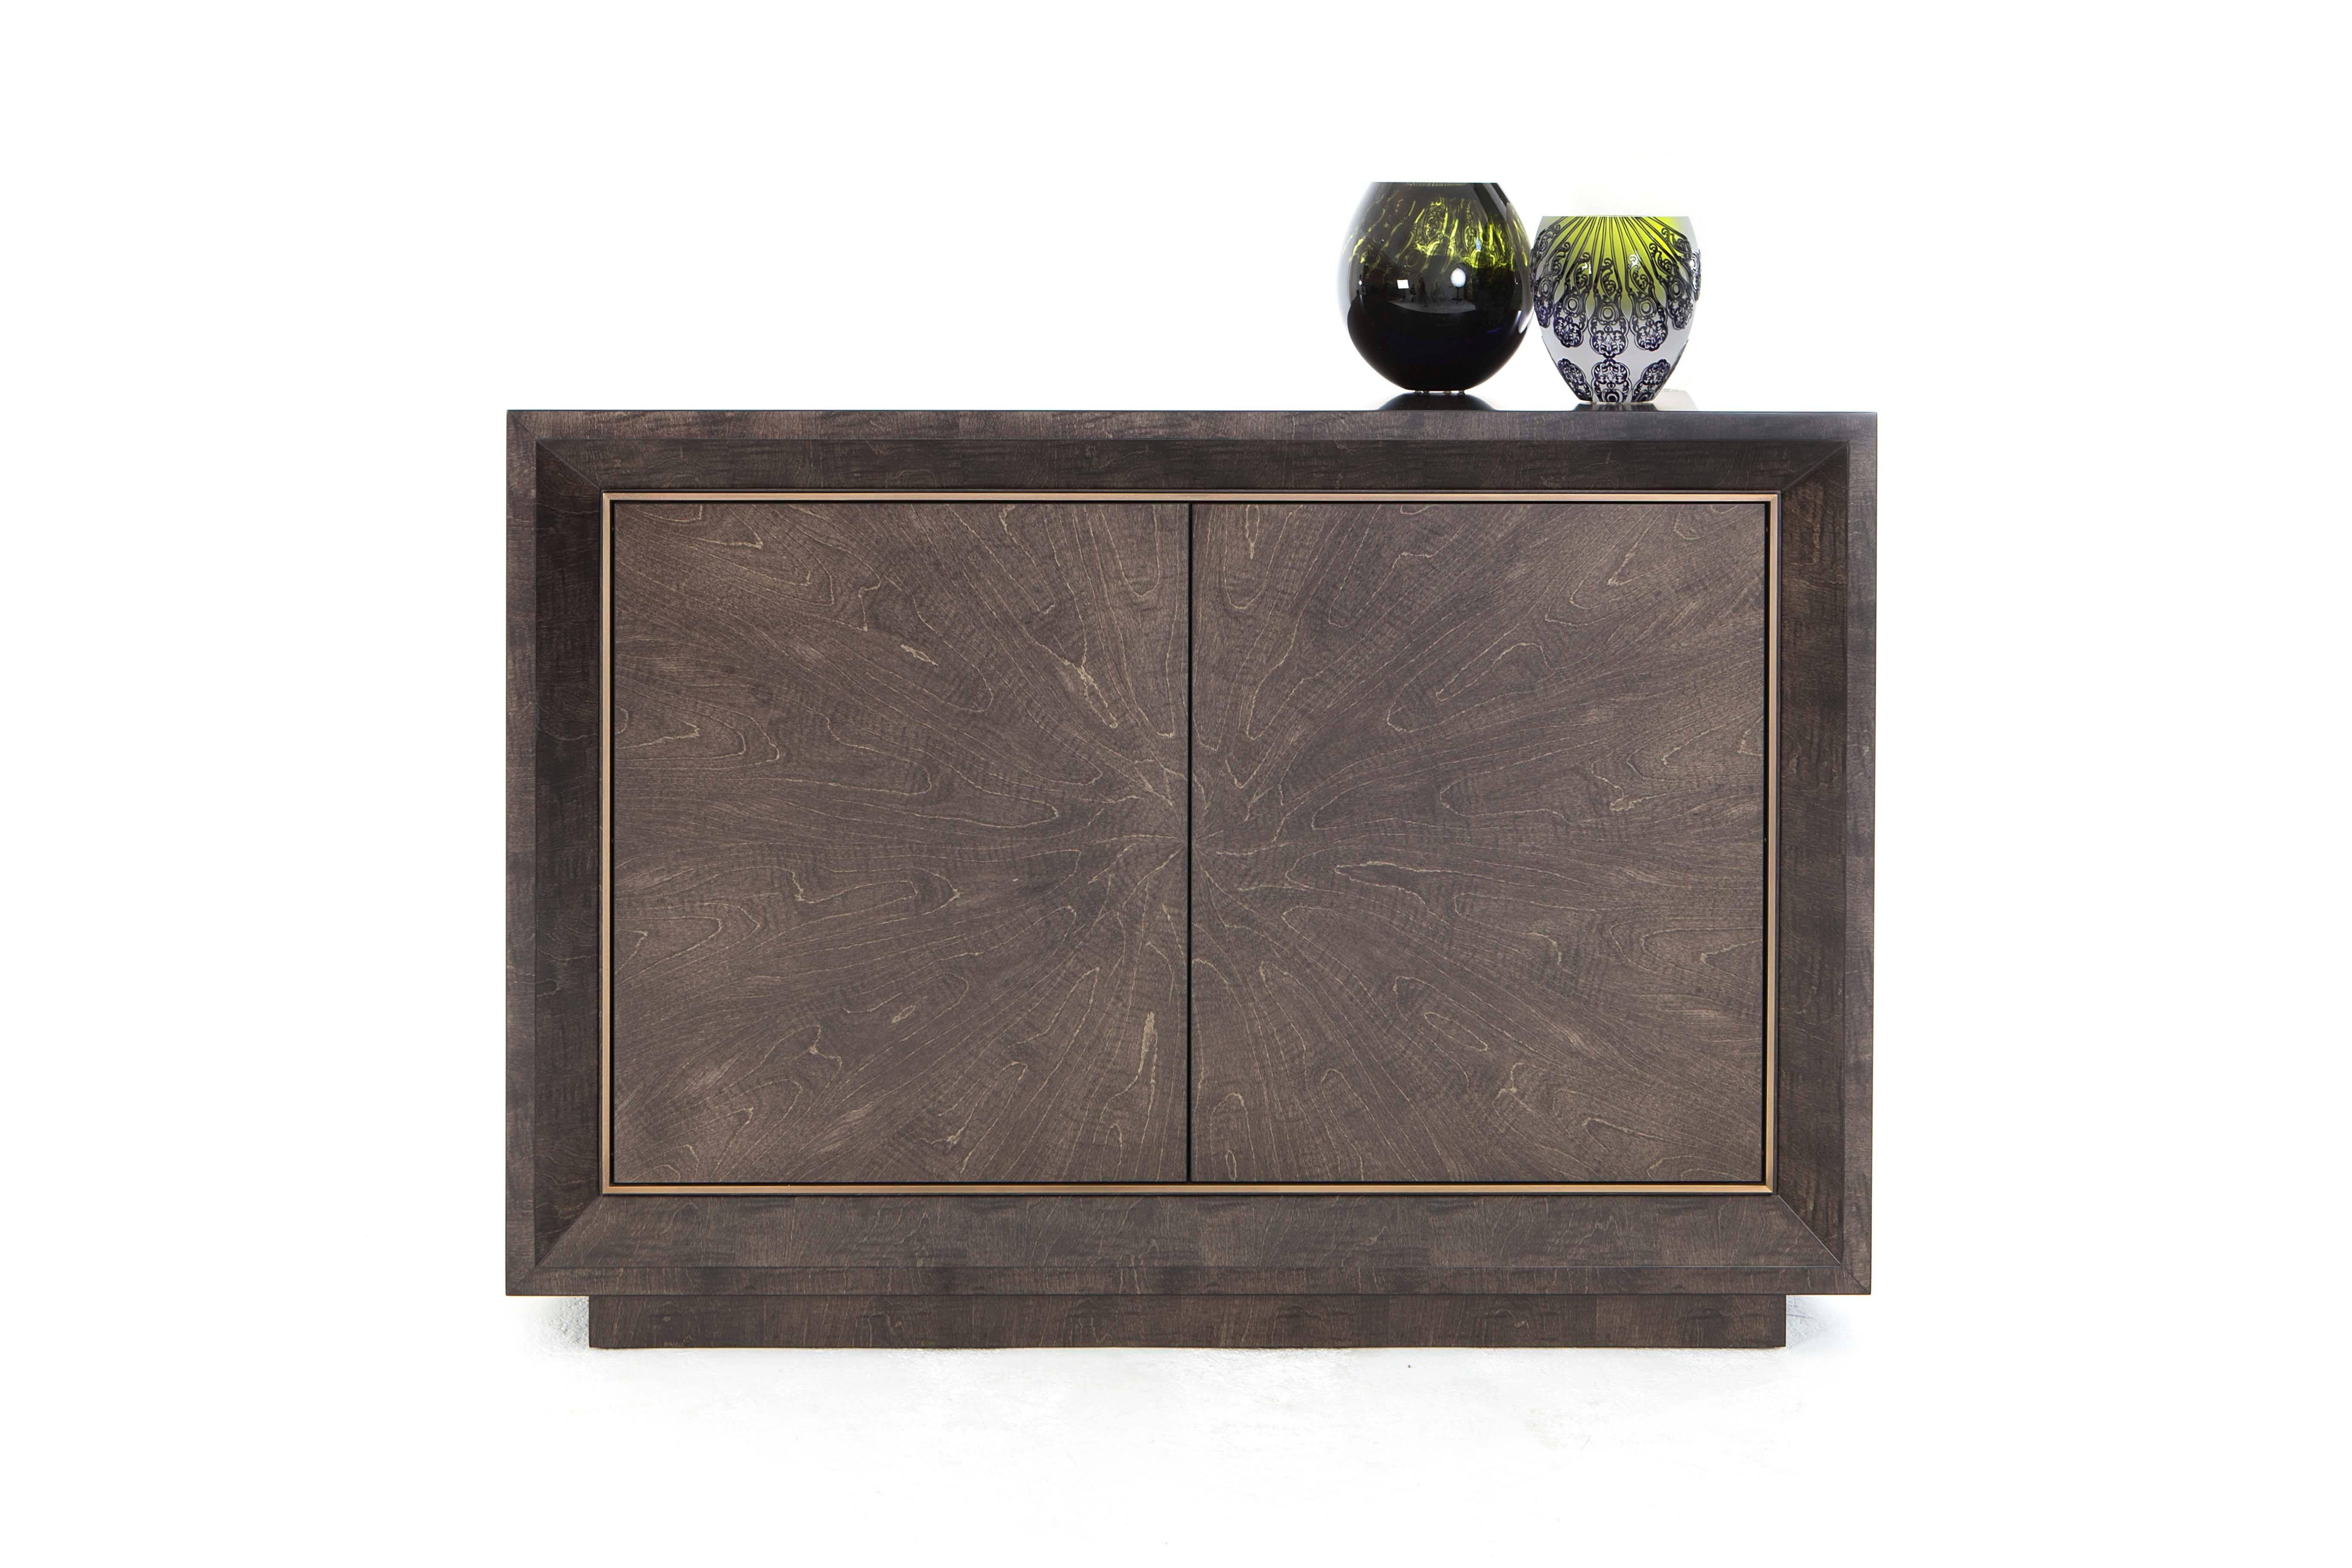 A striking side cabinet finished in satin sycamore grey and antiqued brushed brass.

Smart and refined storage with a luxurious bronze moulding opening to reveal an interior in matte sycamore grey with two adjustable shelves.

There is the option of